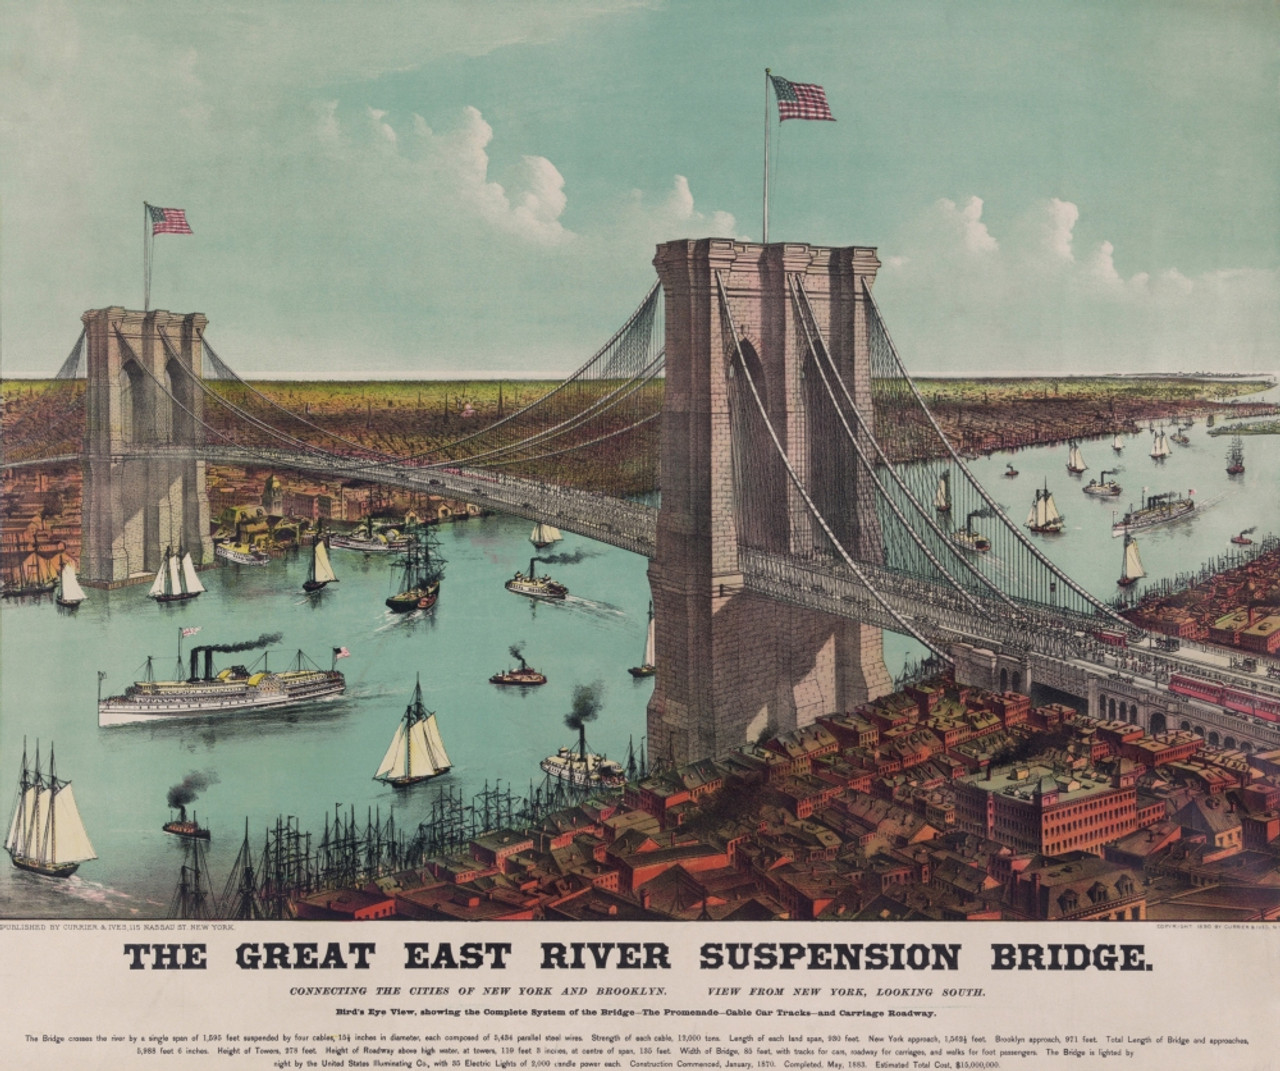 # Brooklyn Viewed The VAREVCHISL023EC020 Item Showing Currier By Ives. Posterazzi Bridge Tracks 1890 Roadway. Manhattan Promenade - Lc-Dig-Pga-03206 And Car Toward Brooklyn South History The Cable Carriage Looking From Chromolithograph -